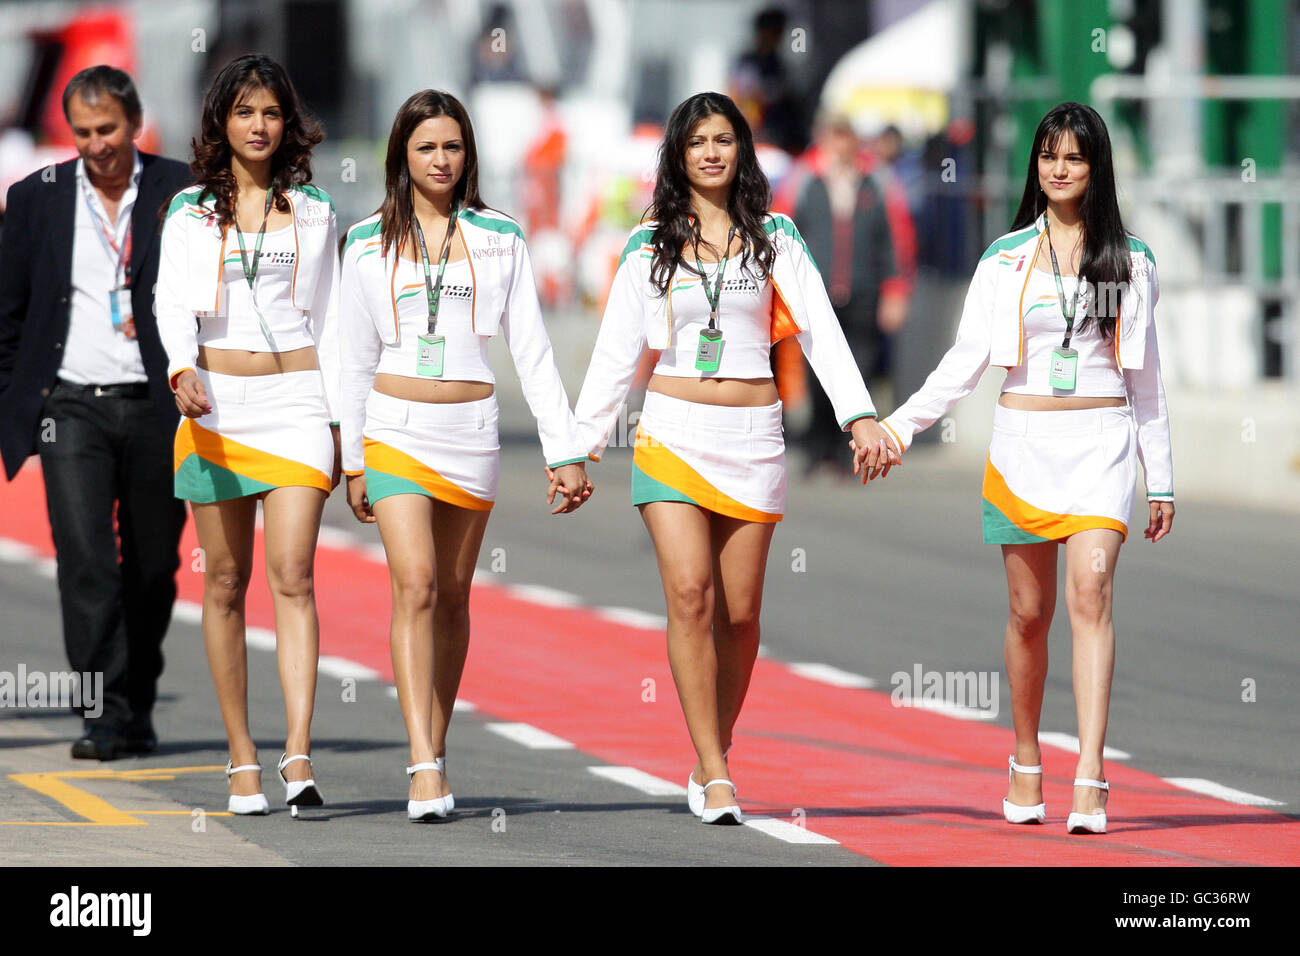 Force India girls in the pit lane during the practice session at Silverstone, Northamptonshire. Stock Photo